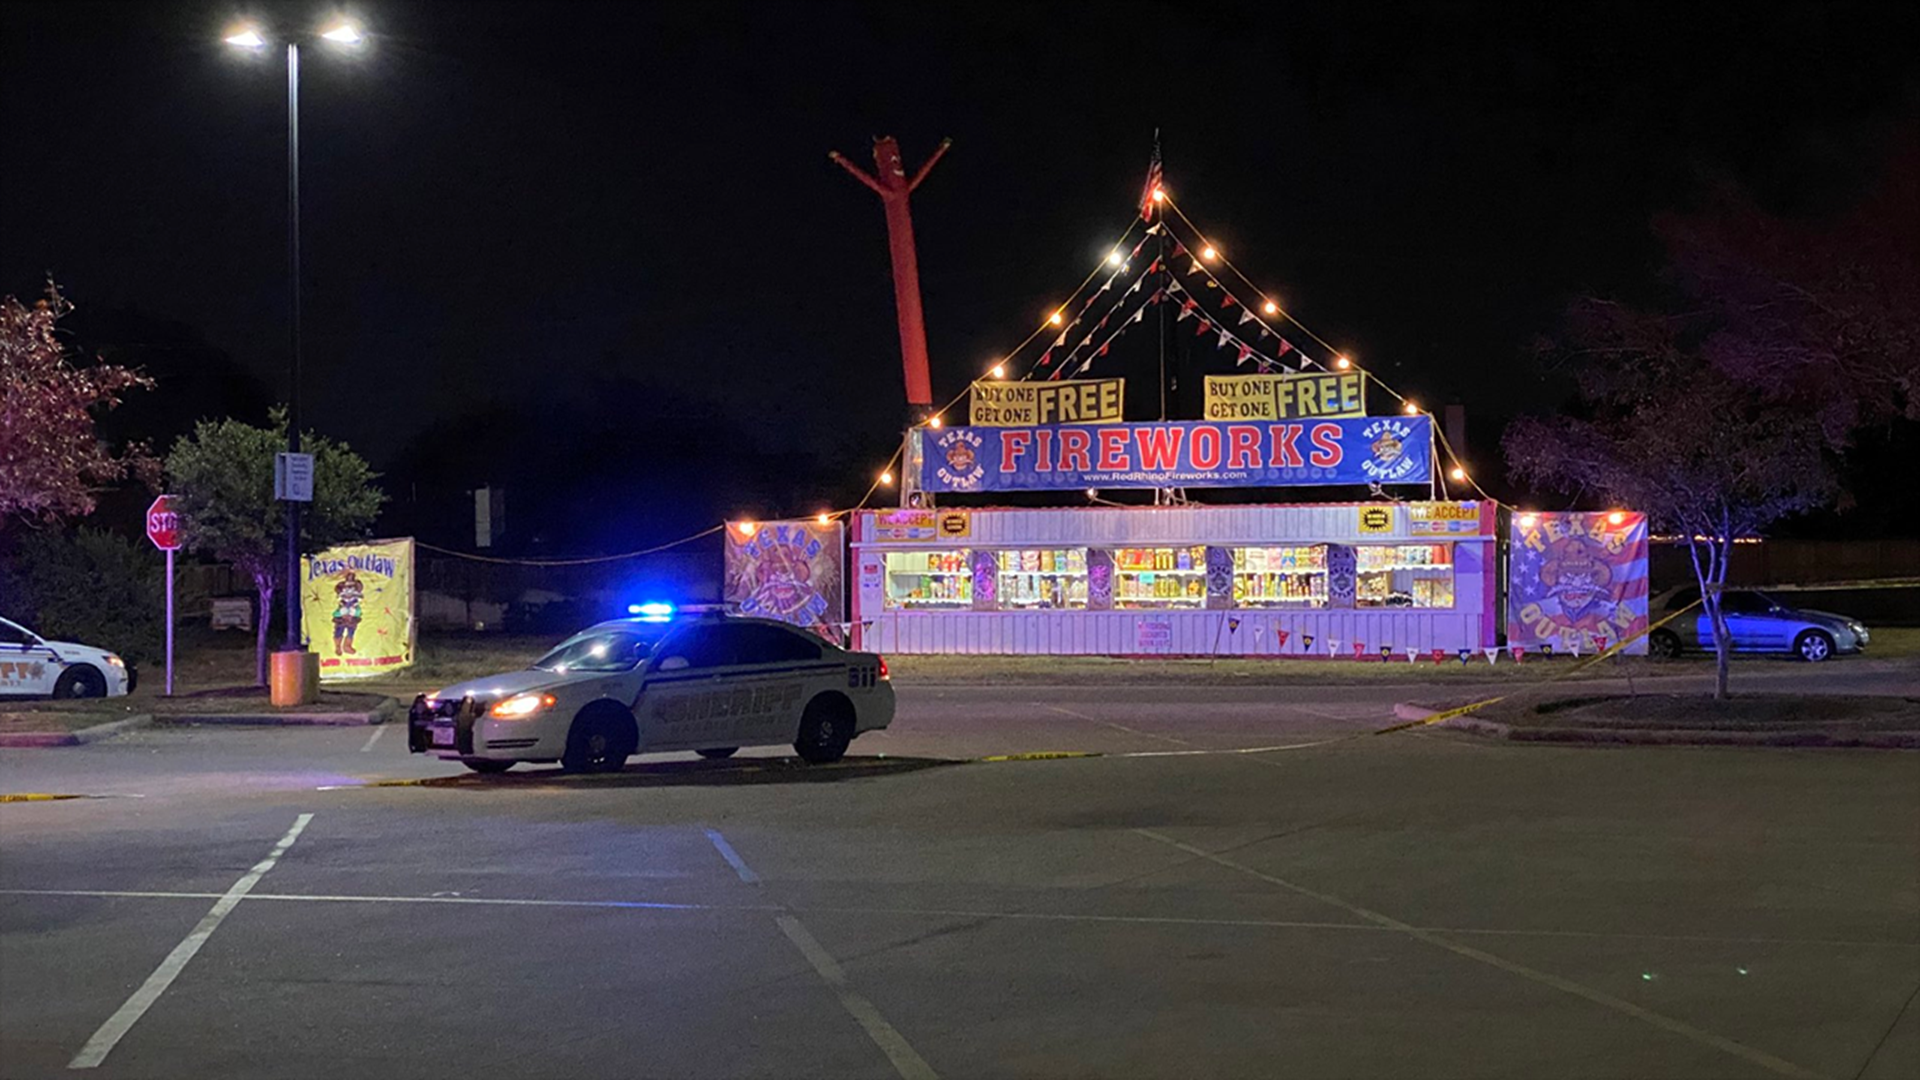 A worker at the fireworks stand was able to disarm one of the robbers and open fire.